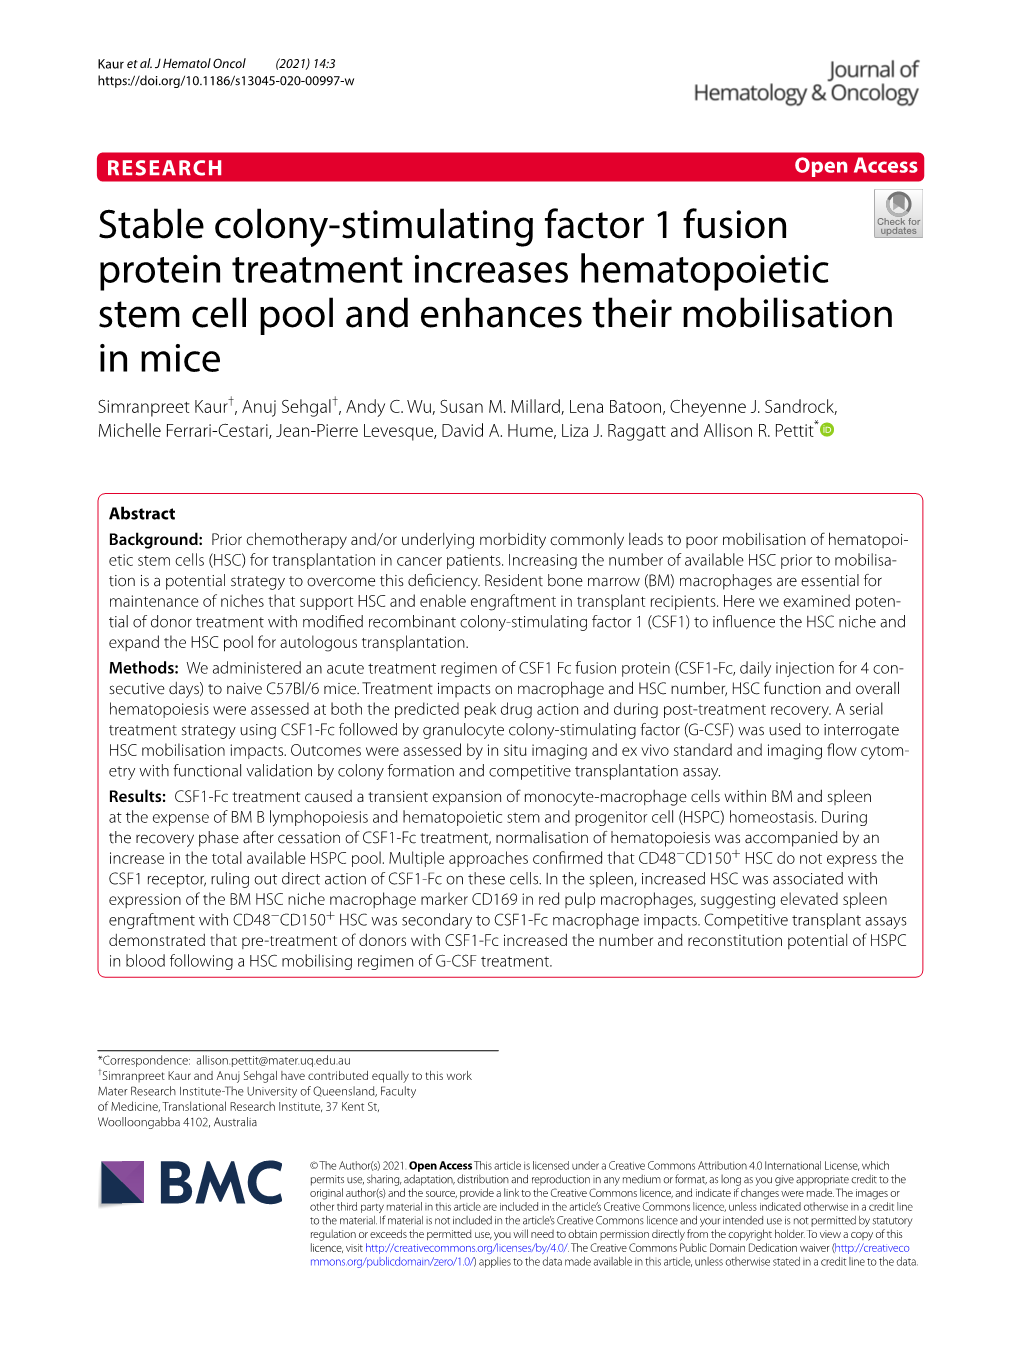 Stable Colony-Stimulating Factor 1 Fusion Protein Treatment Increases